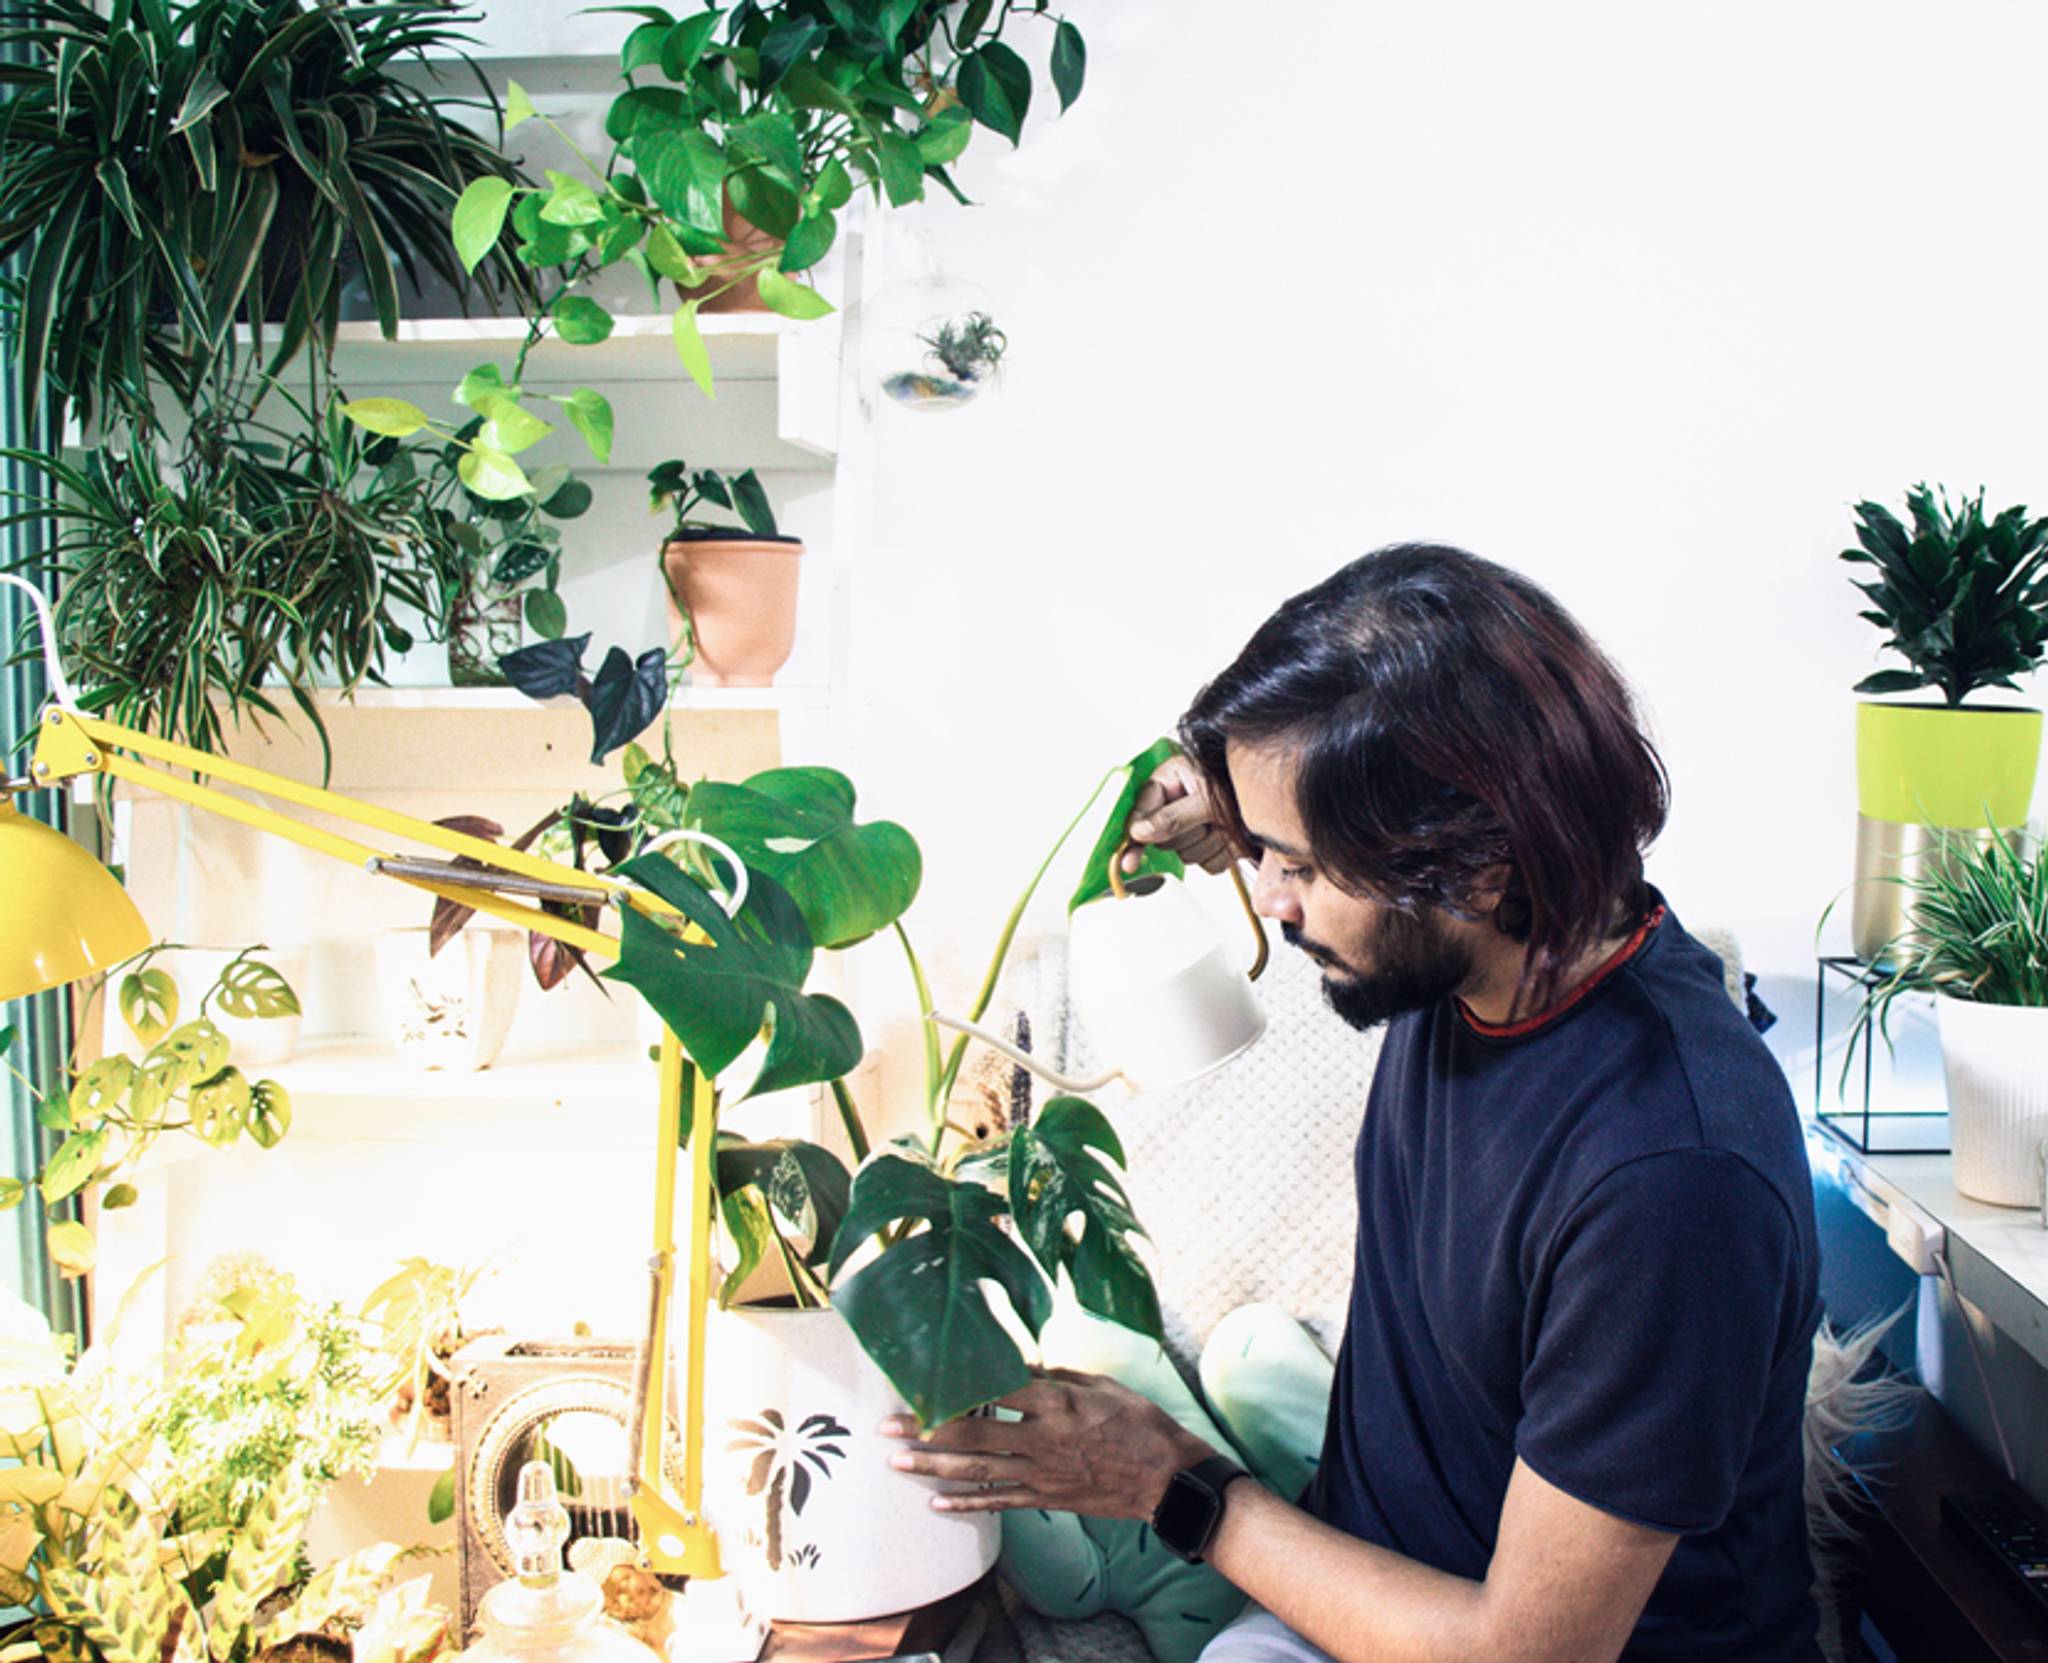 How are plant parents taking sustainable action?